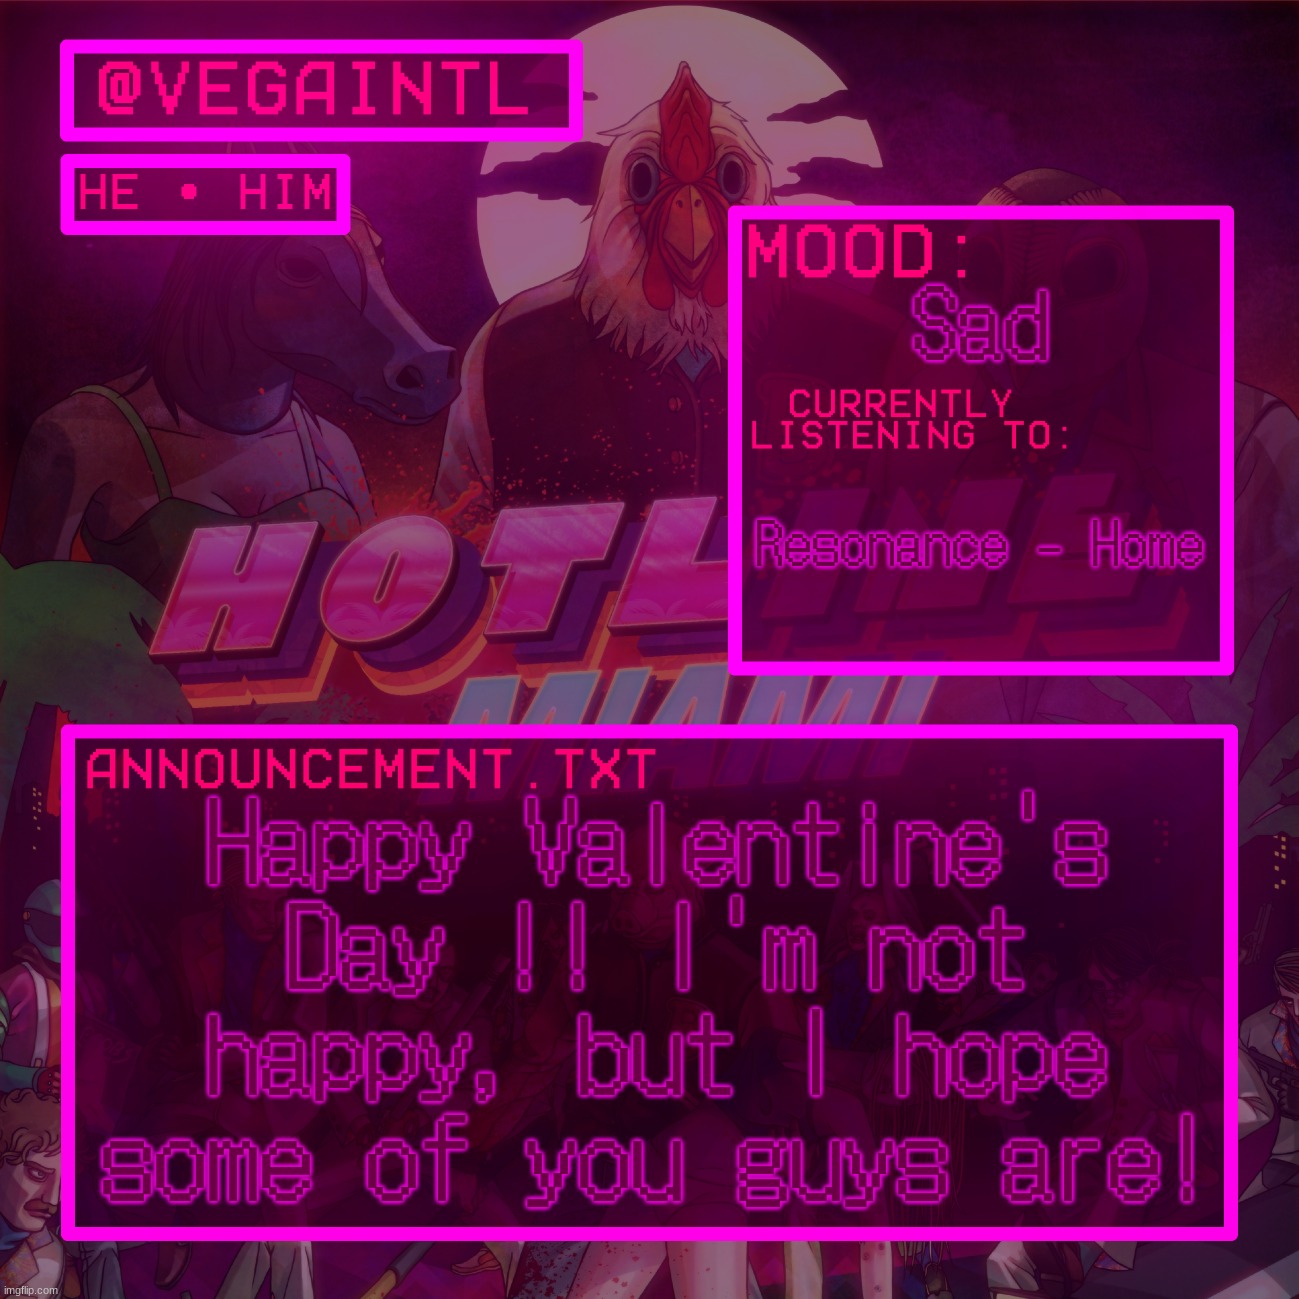 thats genuine btw not sarcastic :] | Sad; Resonance - Home; Happy Valentine's Day !! I'm not happy, but I hope some of you guys are! | image tagged in vega's hotline miami temp | made w/ Imgflip meme maker